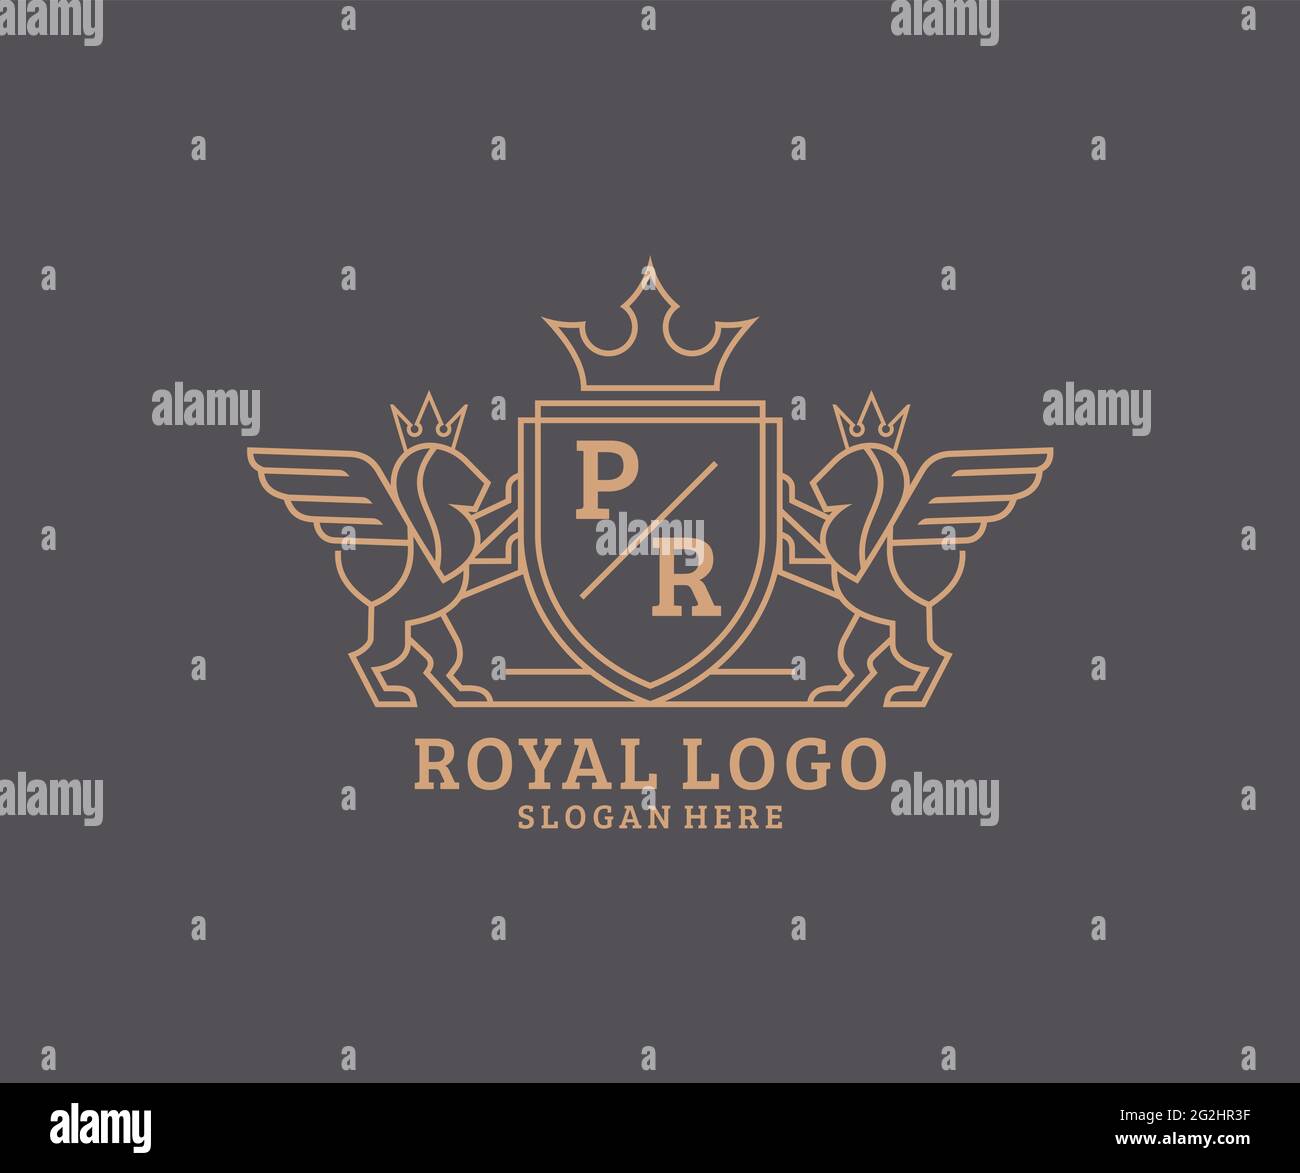 PR Letter Lion Royal Luxury Heraldic,Crest Logo template in vector art for Restaurant, Royalty, Boutique, Cafe, Hotel, Heraldic, Jewelry, Fashion and Stock Vector